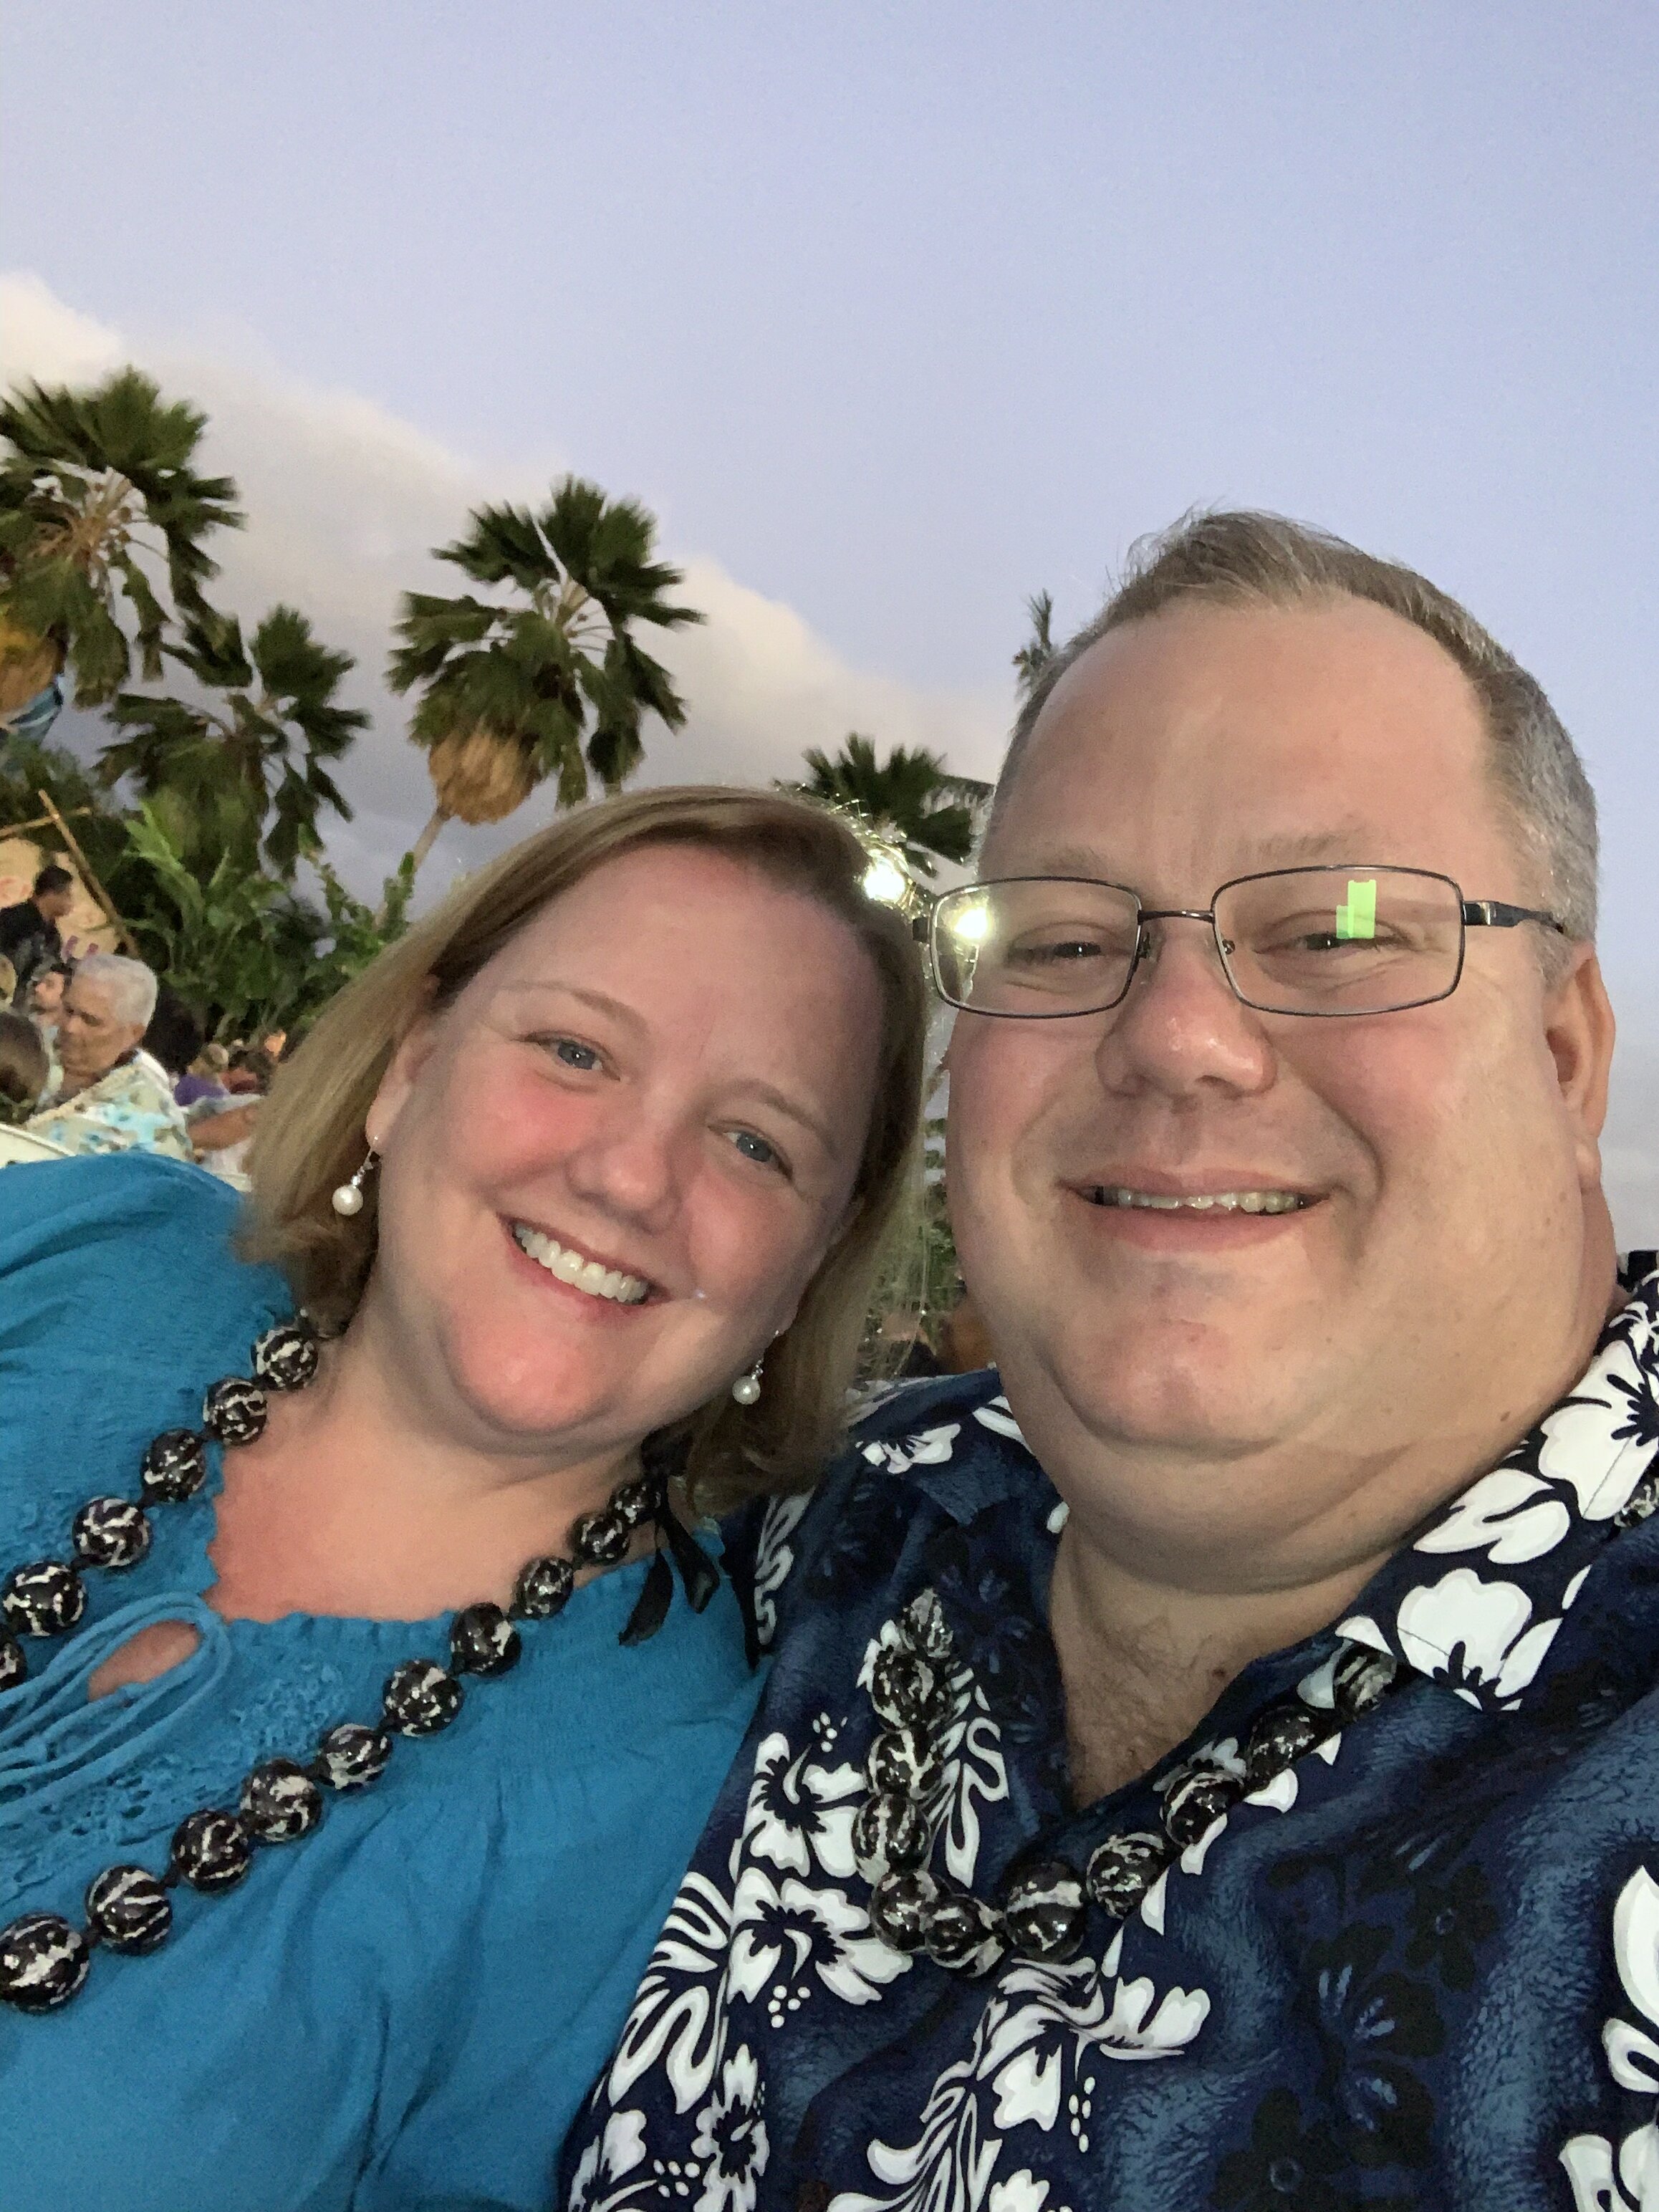 photograph of Mr. Morrow in Hawaii with his wife. She has blond hair and is wearing a teal top. Mr. Morrow is wearing a dark blue floral print shirt and glasses.